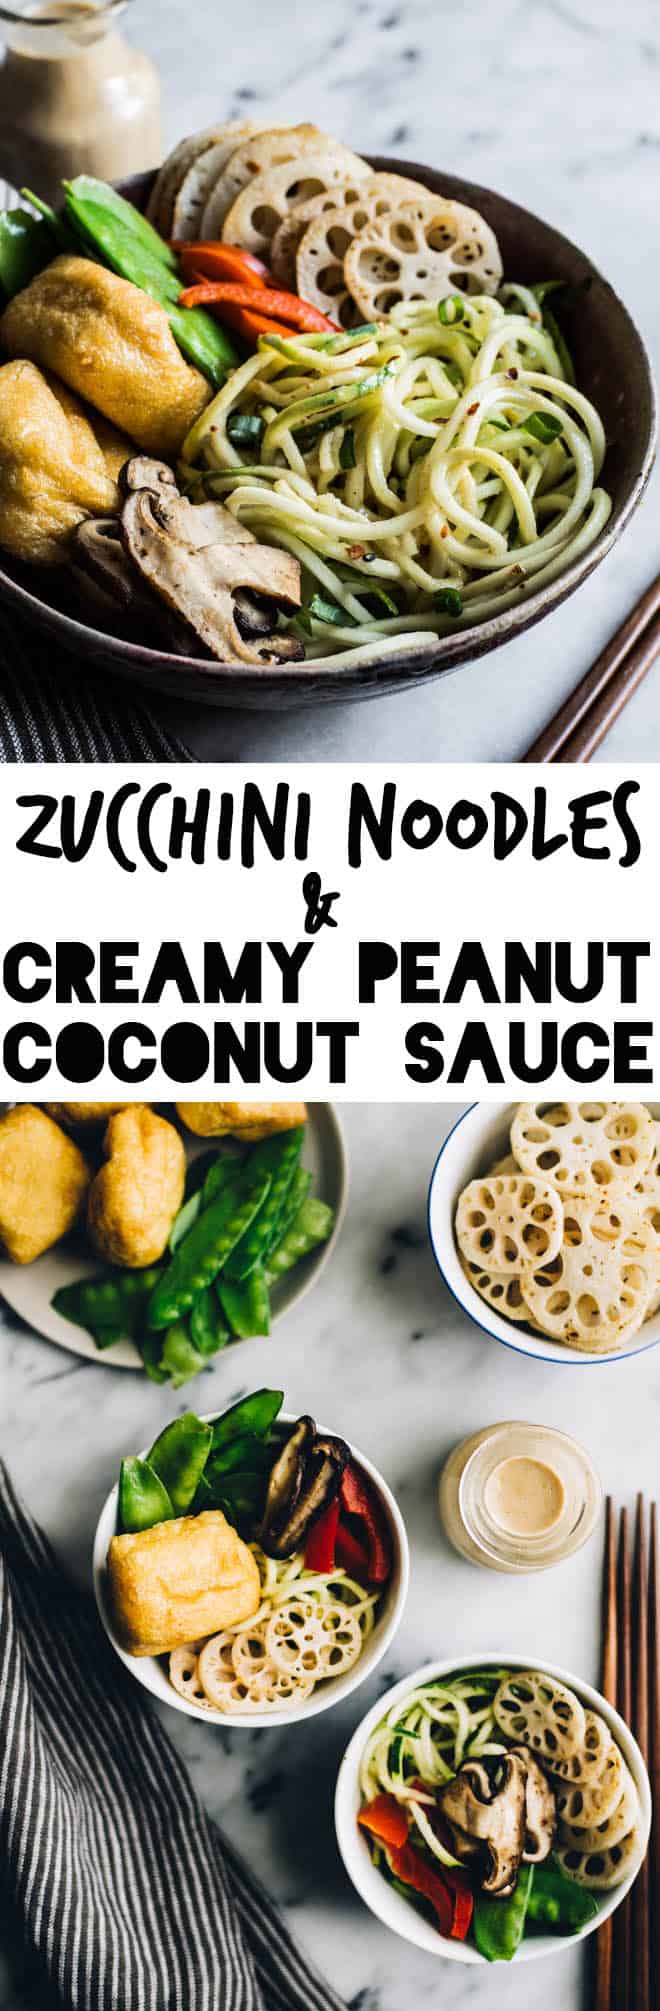 Zucchini Noodle (Zoodles) Bowl with Peanut Coconut Sauce - this dreamy vegan and gluten-free bowl is ready in 30 minutes! by Lisa Lin of webserie.futebolmilionario.com